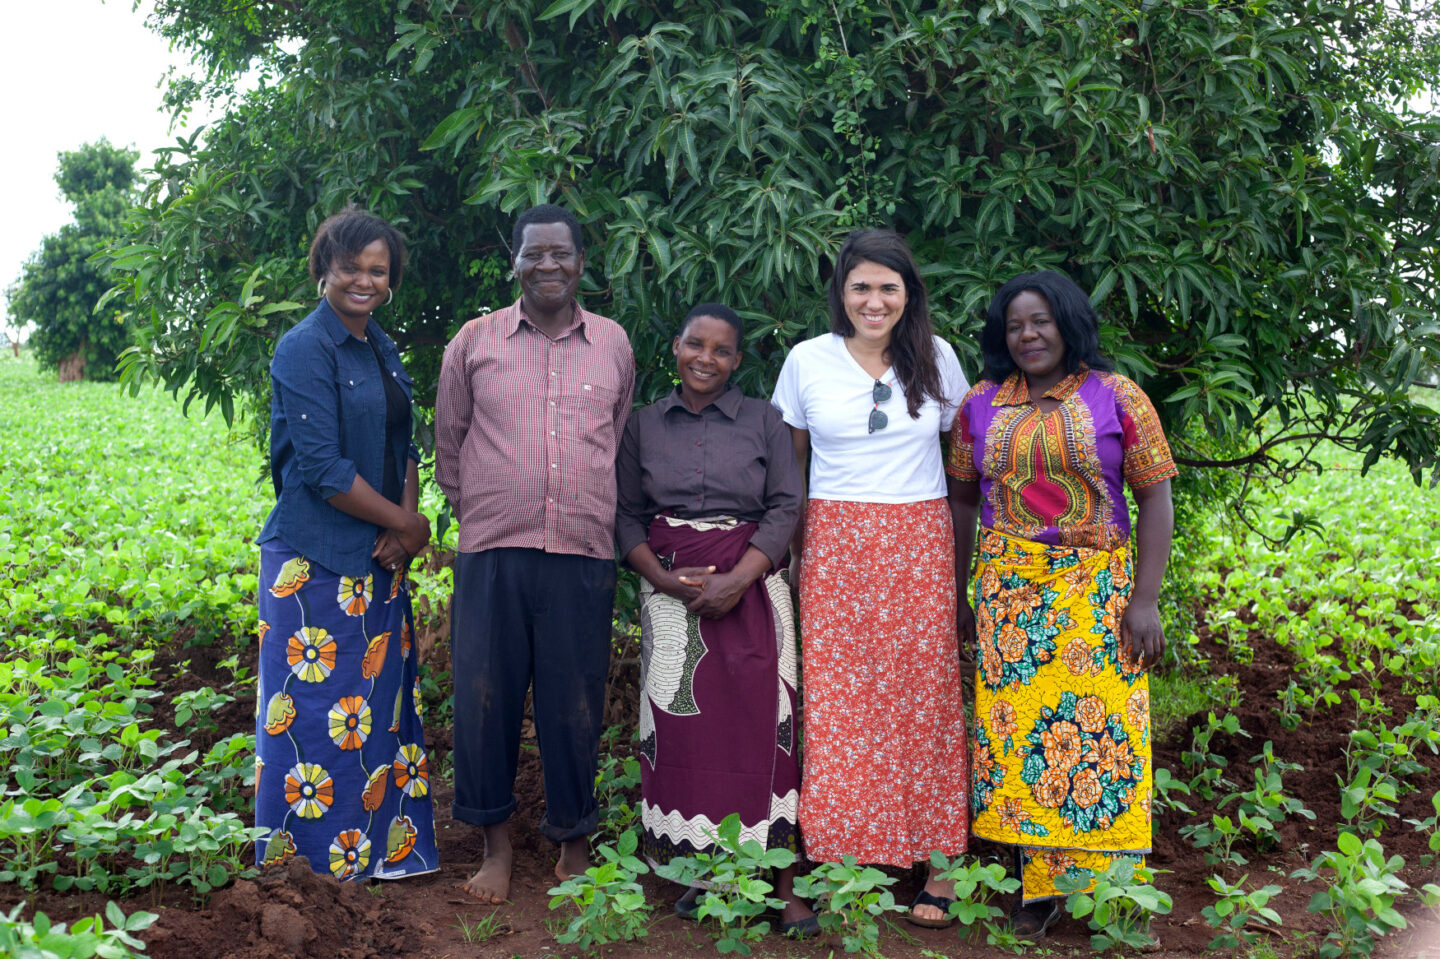 Clinton Foundation staff and farmers stand in front of a soybean field in Malawi